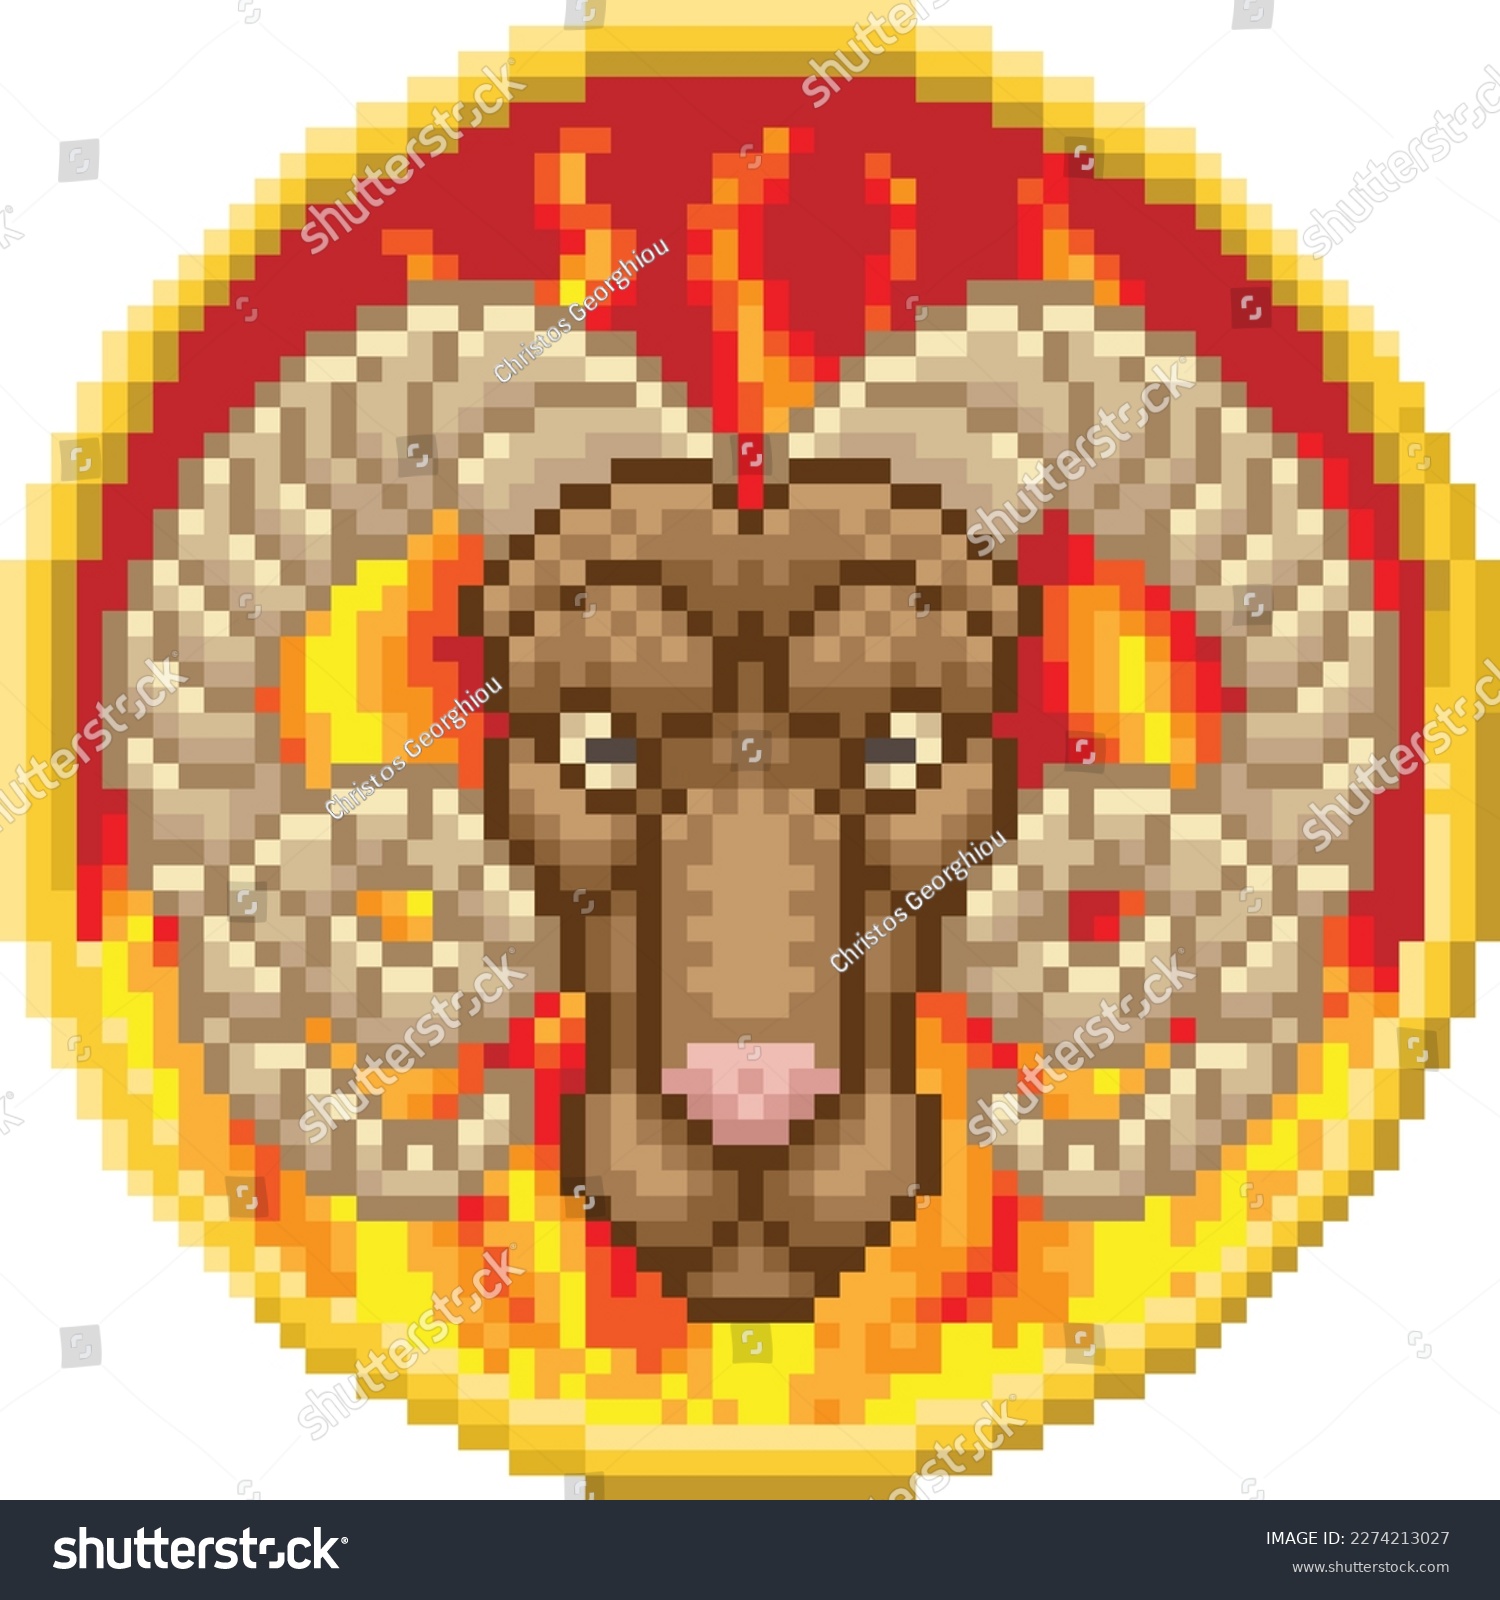 SVG of A zodiac horoscope or astrology Aries ram horned goat sign in a retro video game arcade 8 bit pixel art style svg